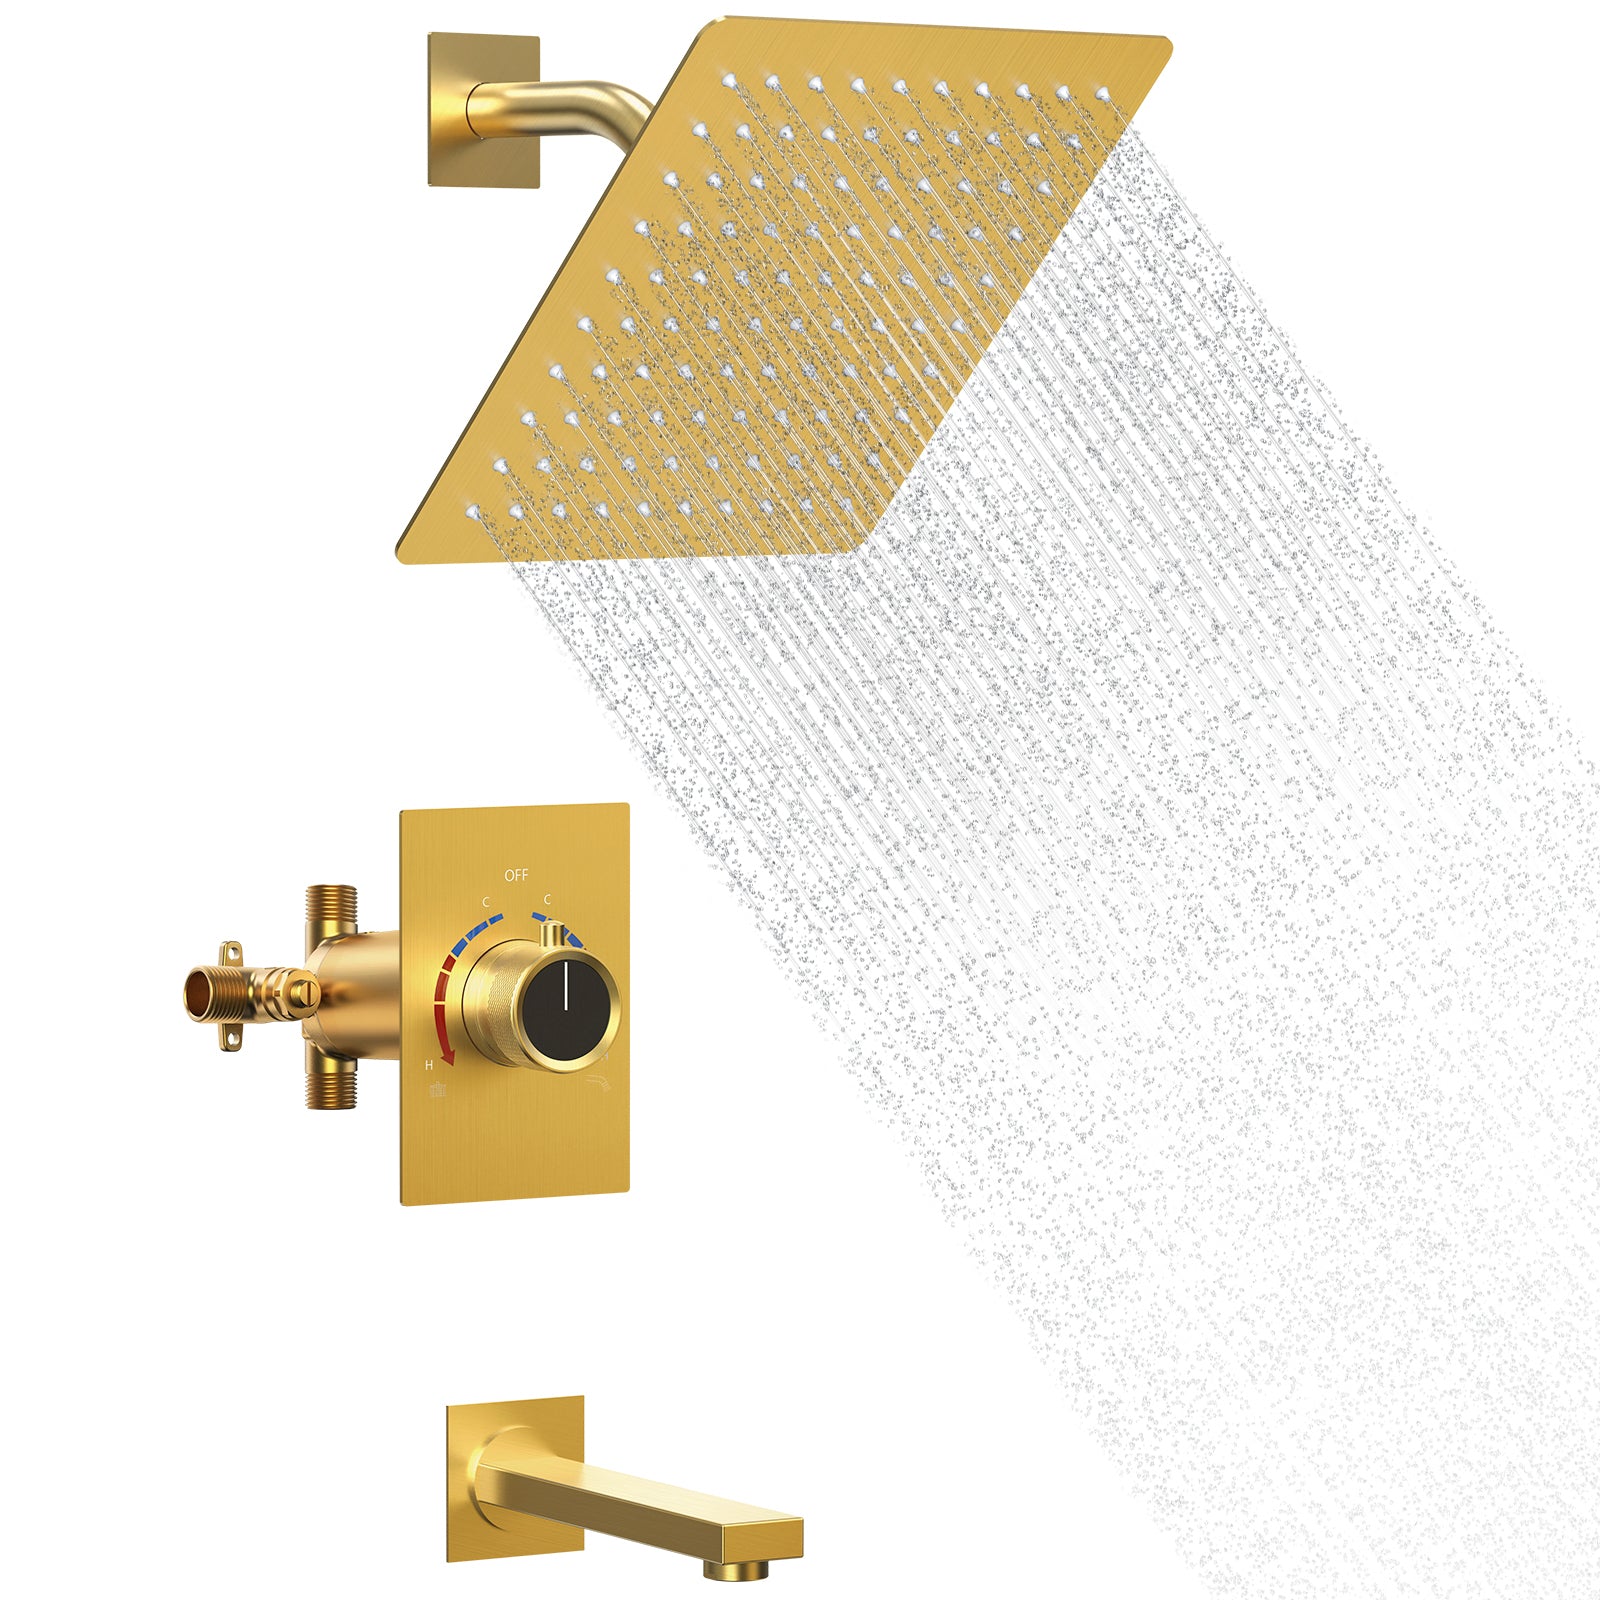 SFS-1035-GD8  8" High-Pressure Function Rainfall Shower Head, Wall Mount, Rough in-Valve, 2.5 GPM